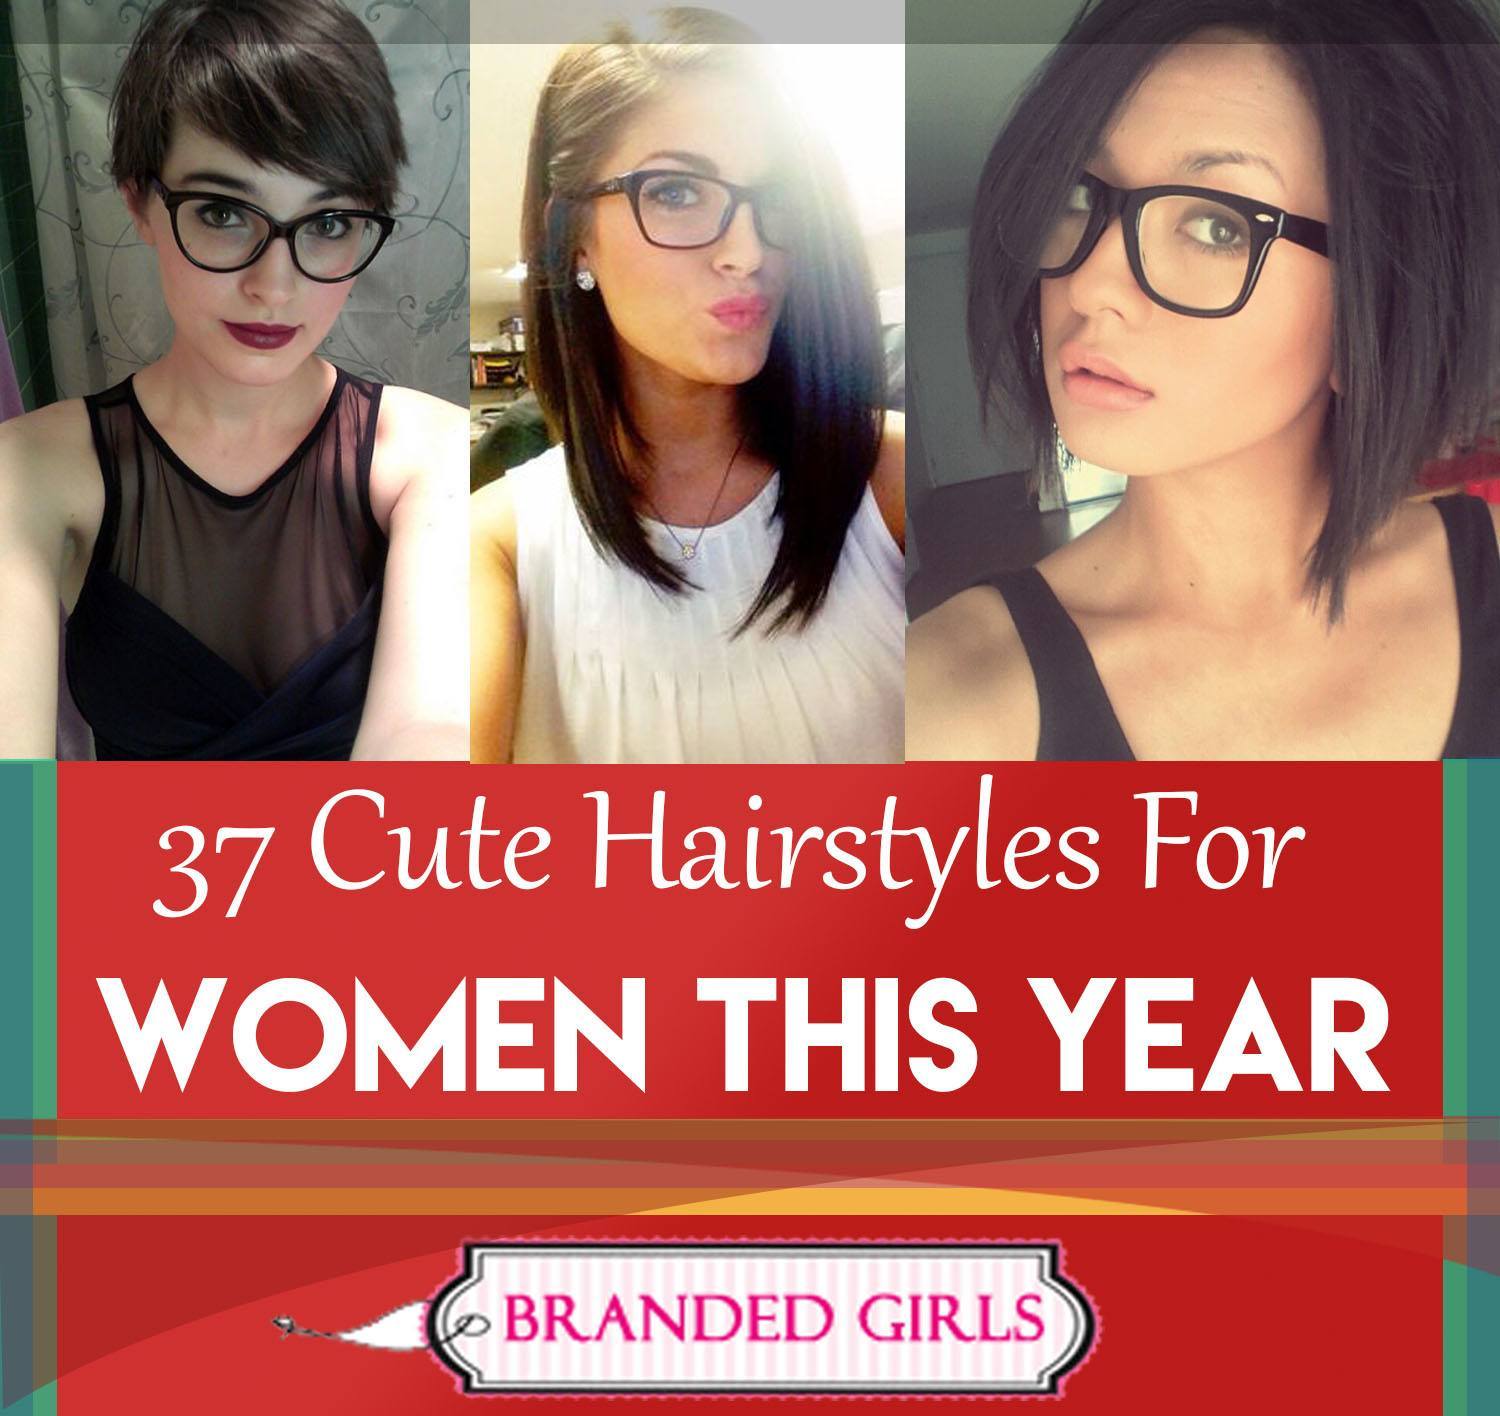 37 cute hairstyles for women this year